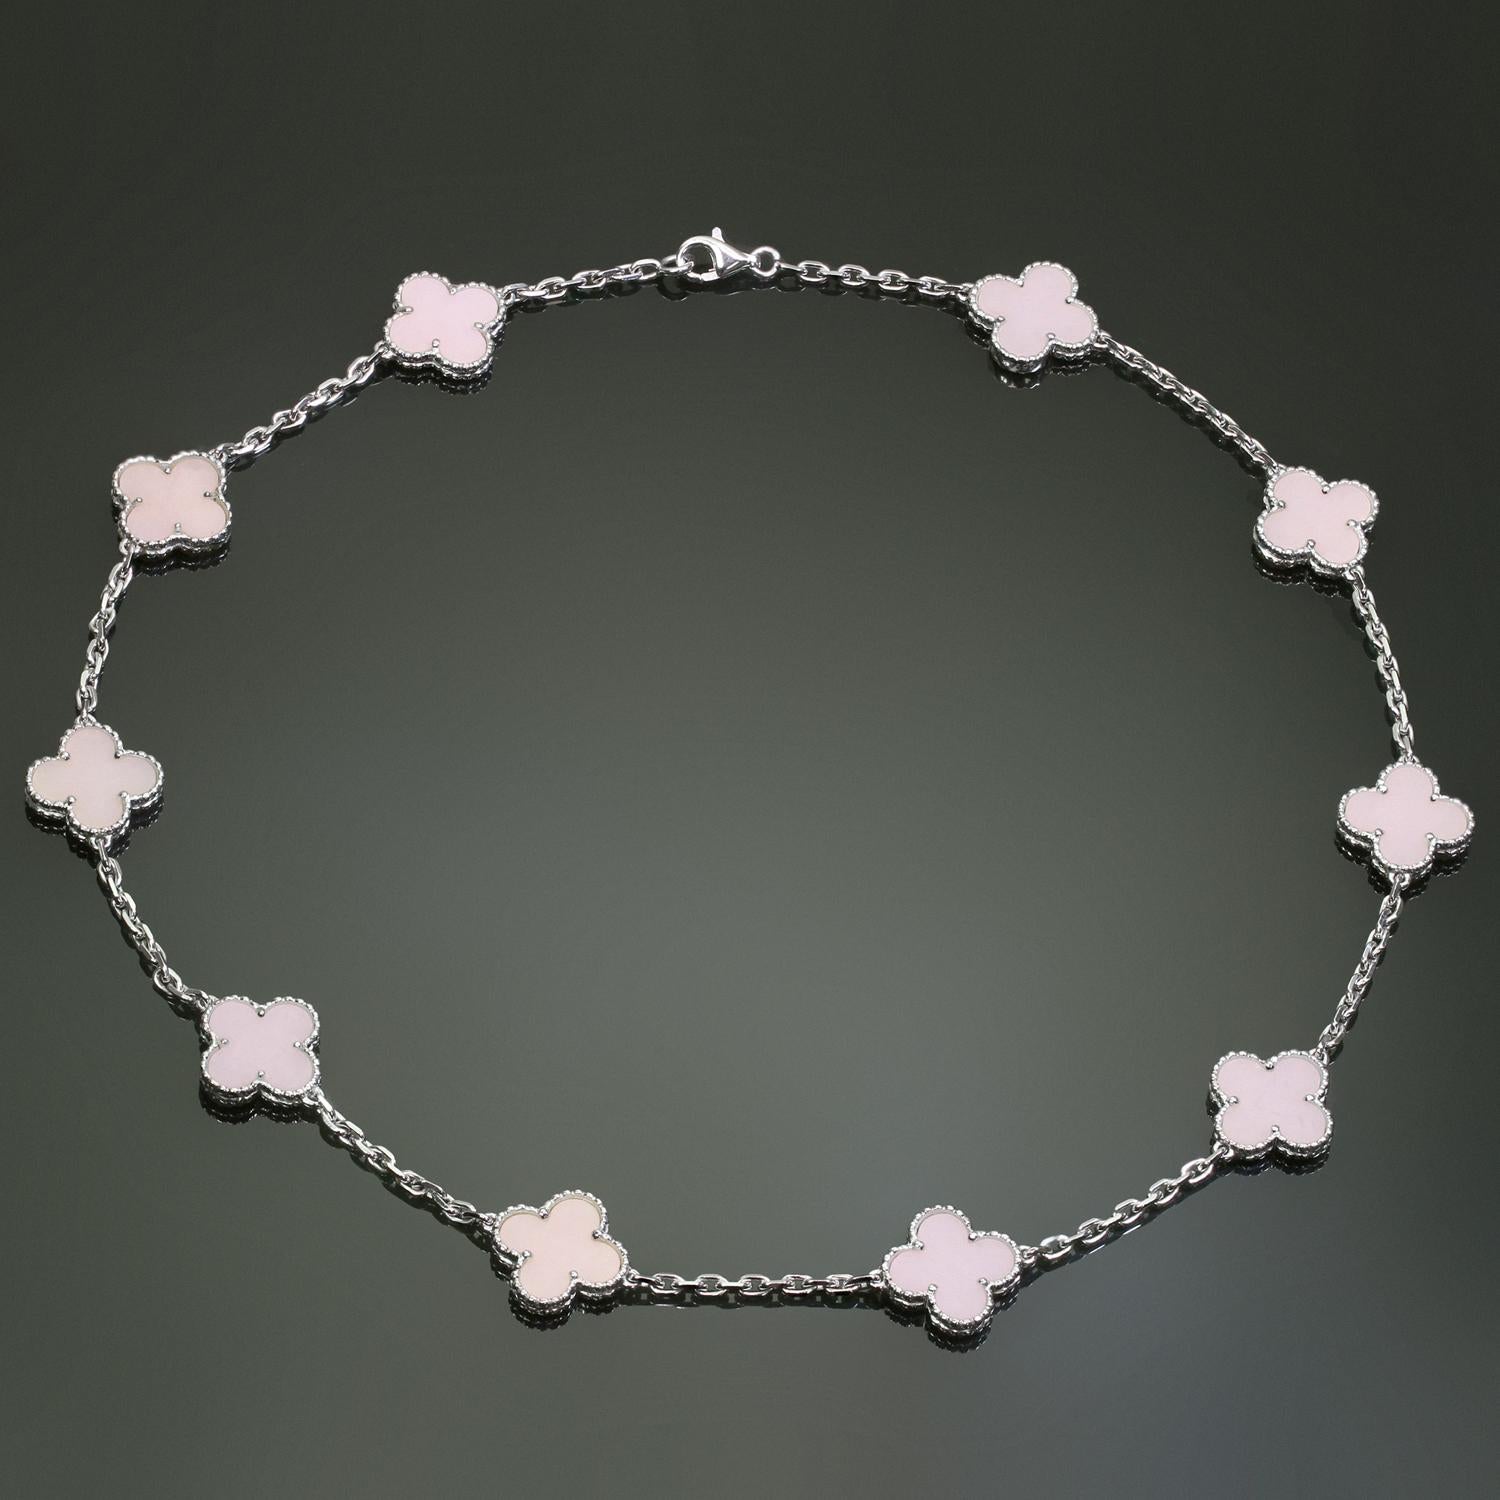 This splendid Van Cleef & Arpels necklace from the iconic Alhambra collection is crafted in 18k white gold and features 10 lucky clover motifs beautifully inlaid with natural pink opal in round bead settings. This extremely rare necklace has been